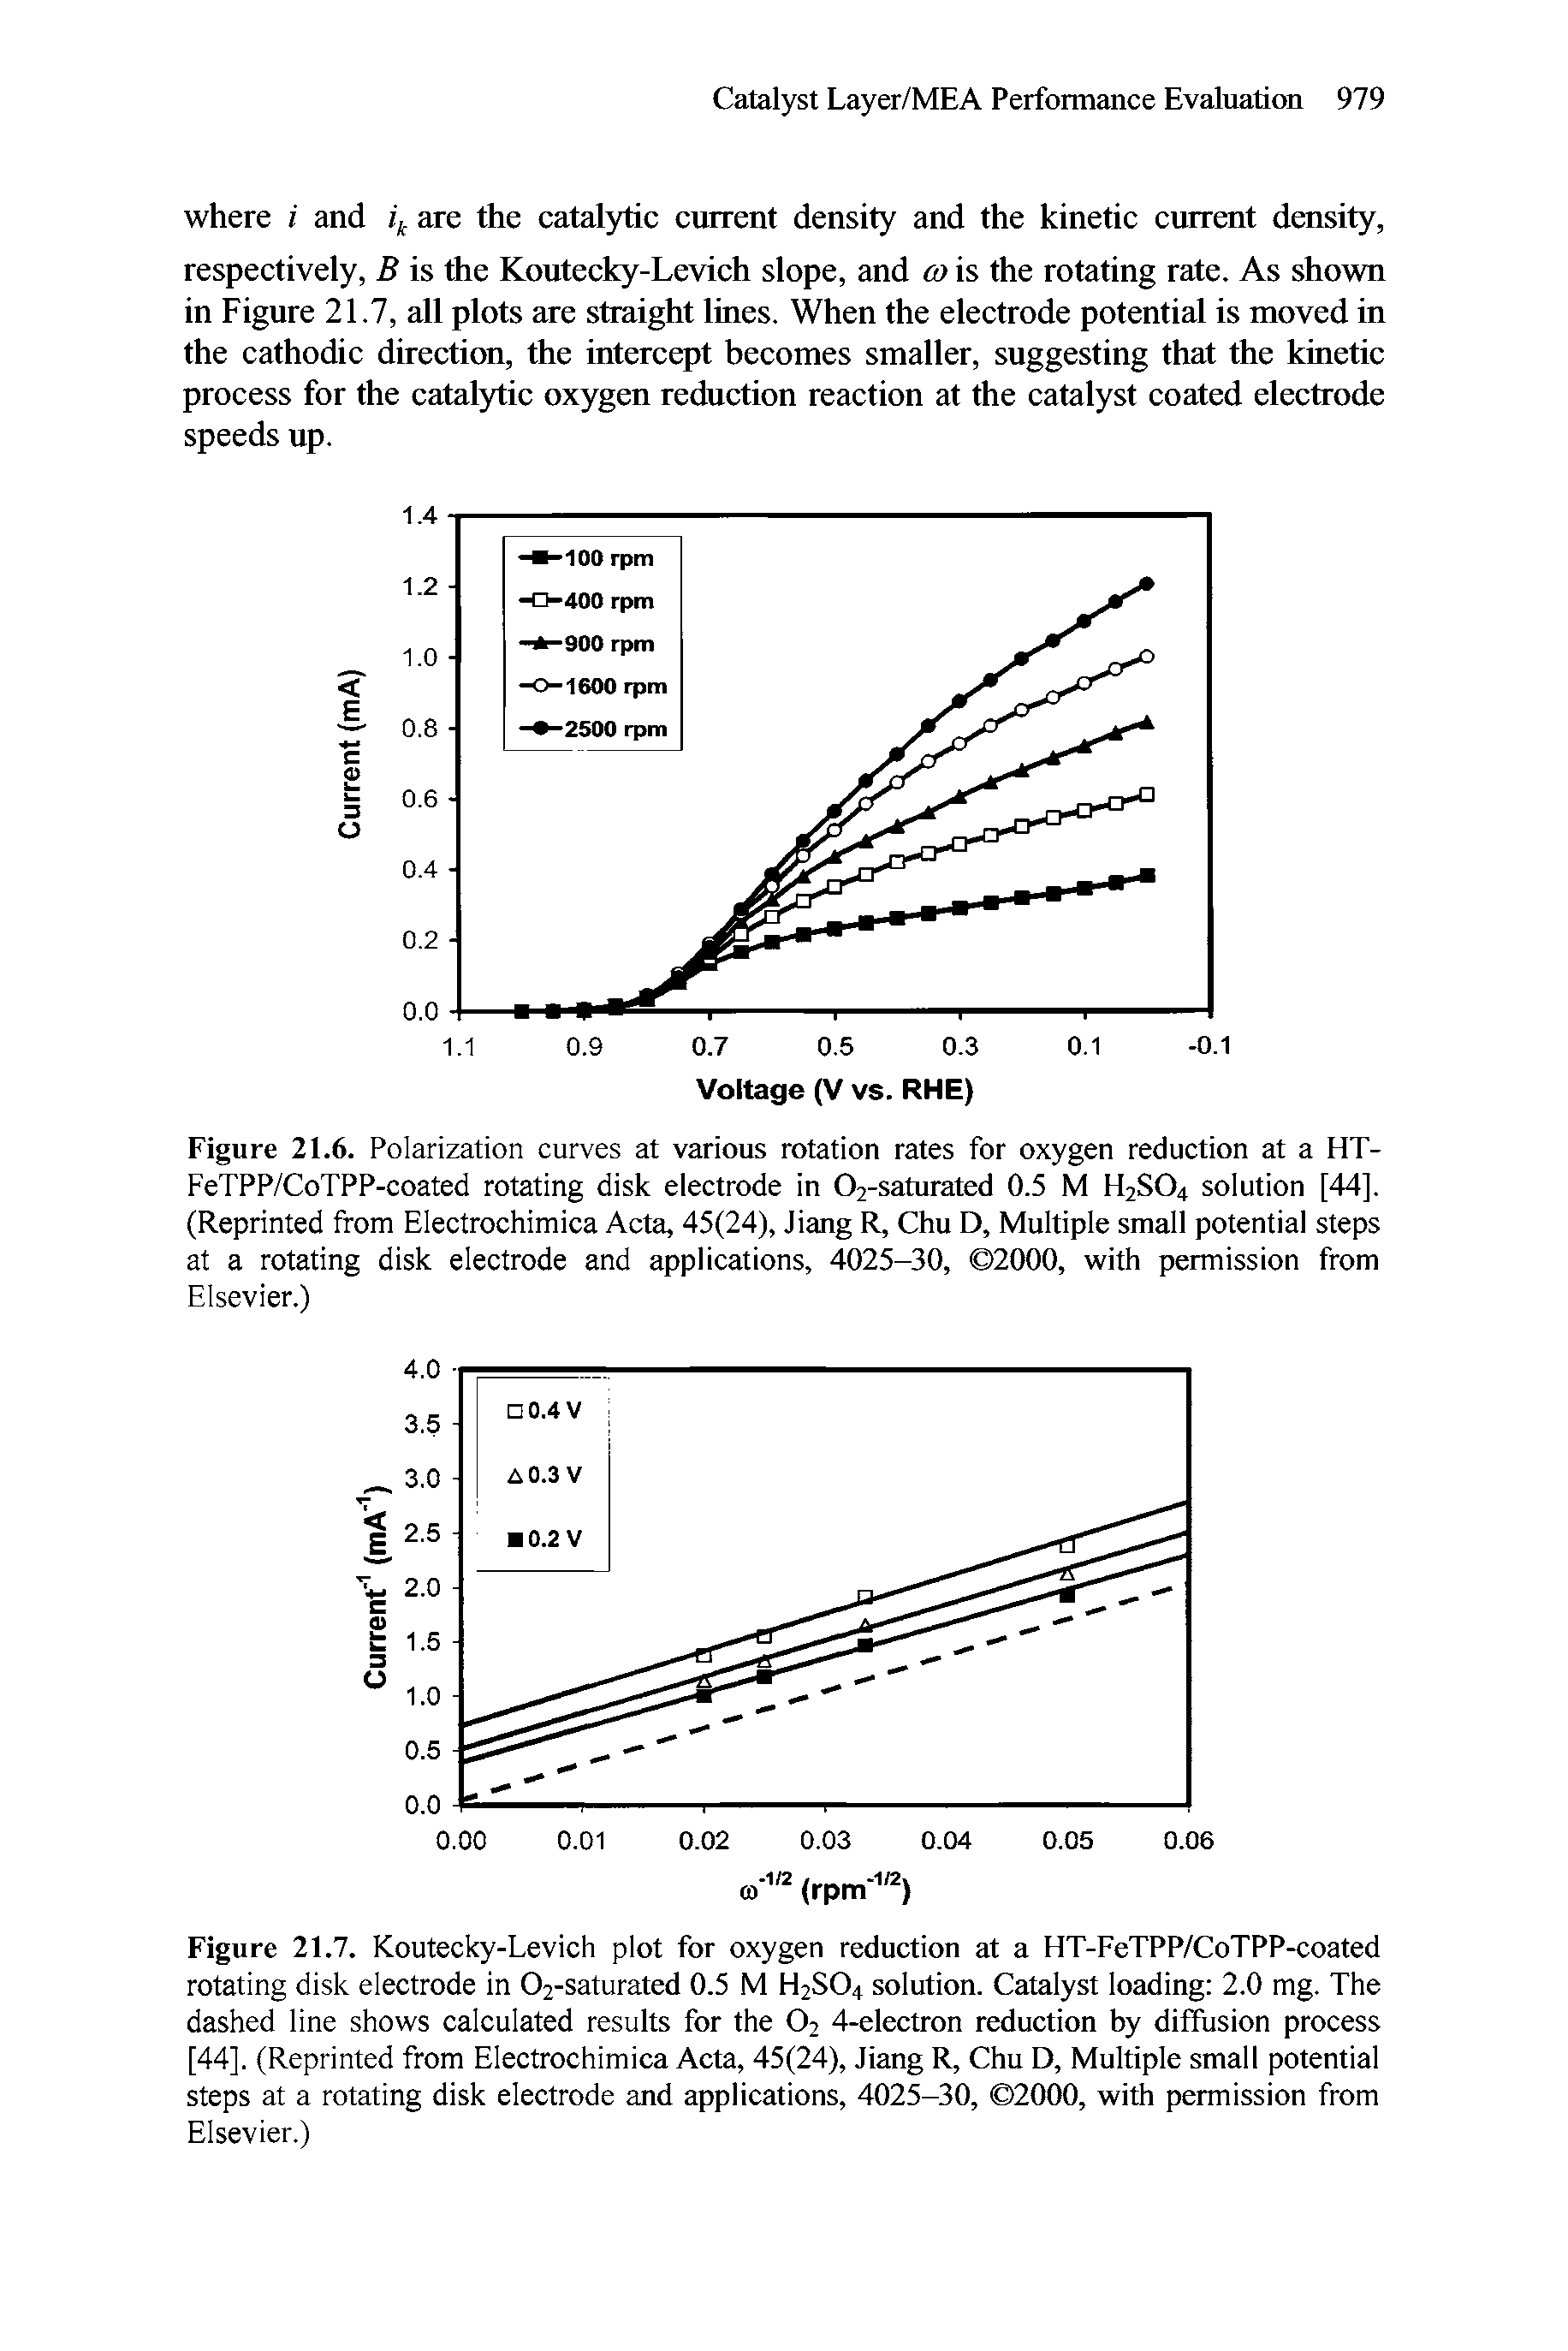 Figure 21.6. Polarization curves at various rotation rates for oxygen reduction at a HT-FeTPP/CoTPP-coated rotating disk electrode in 02-saturated 0.5 M H2SO4 solution [44]. (Reprinted from Electrochimica Acta, 45(24), Jiang R, Chu D, Multiple small potential steps at a rotating disk electrode and applications, 4025-30, 2000, with permission from...